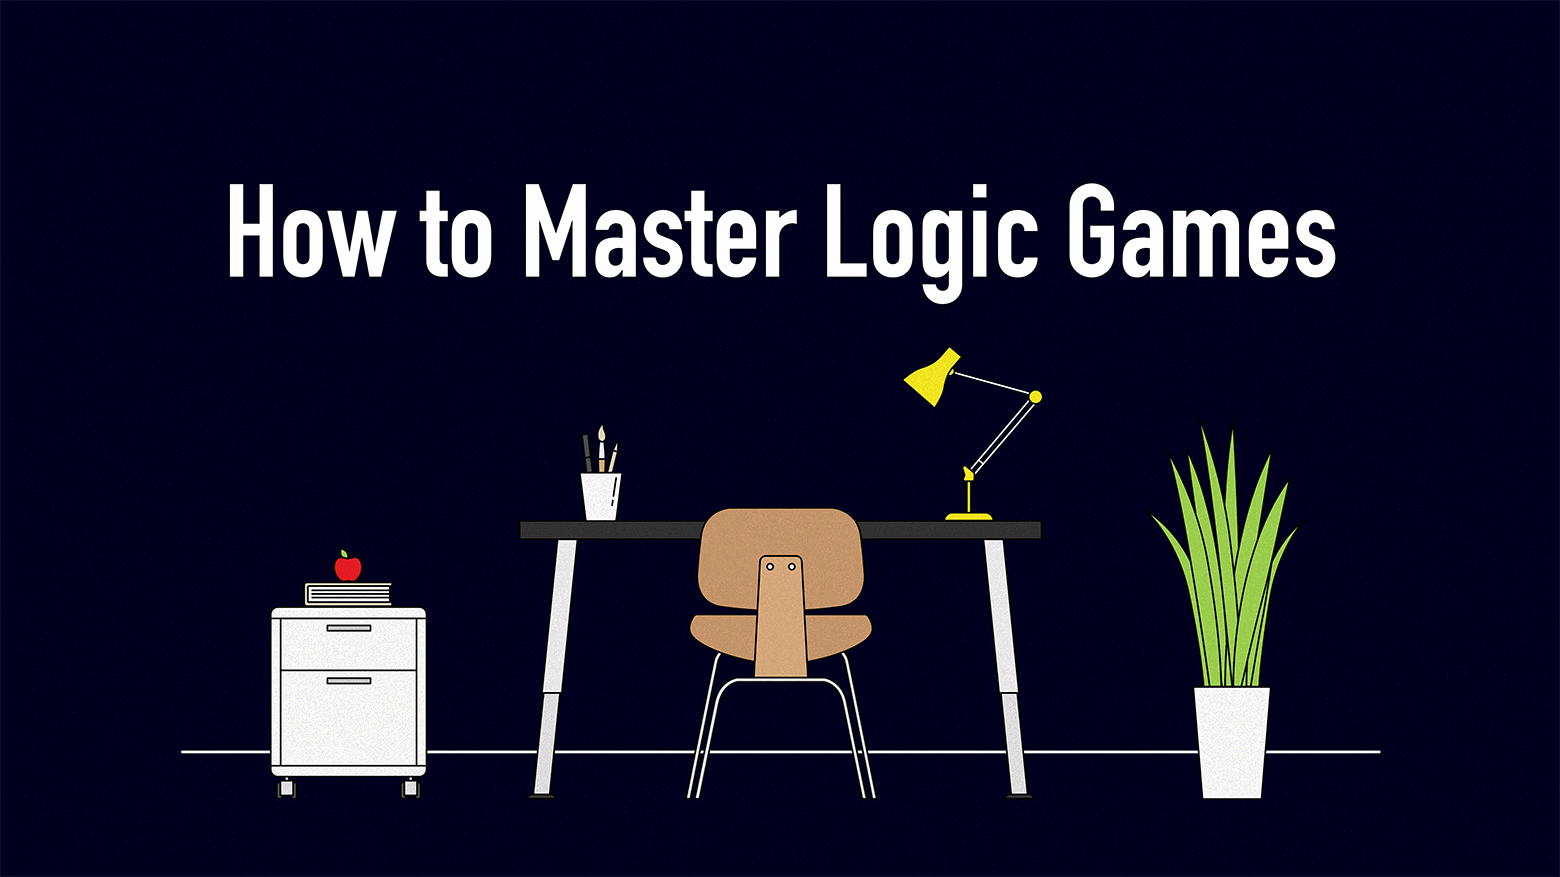 Essential Logic Games Tips and Information